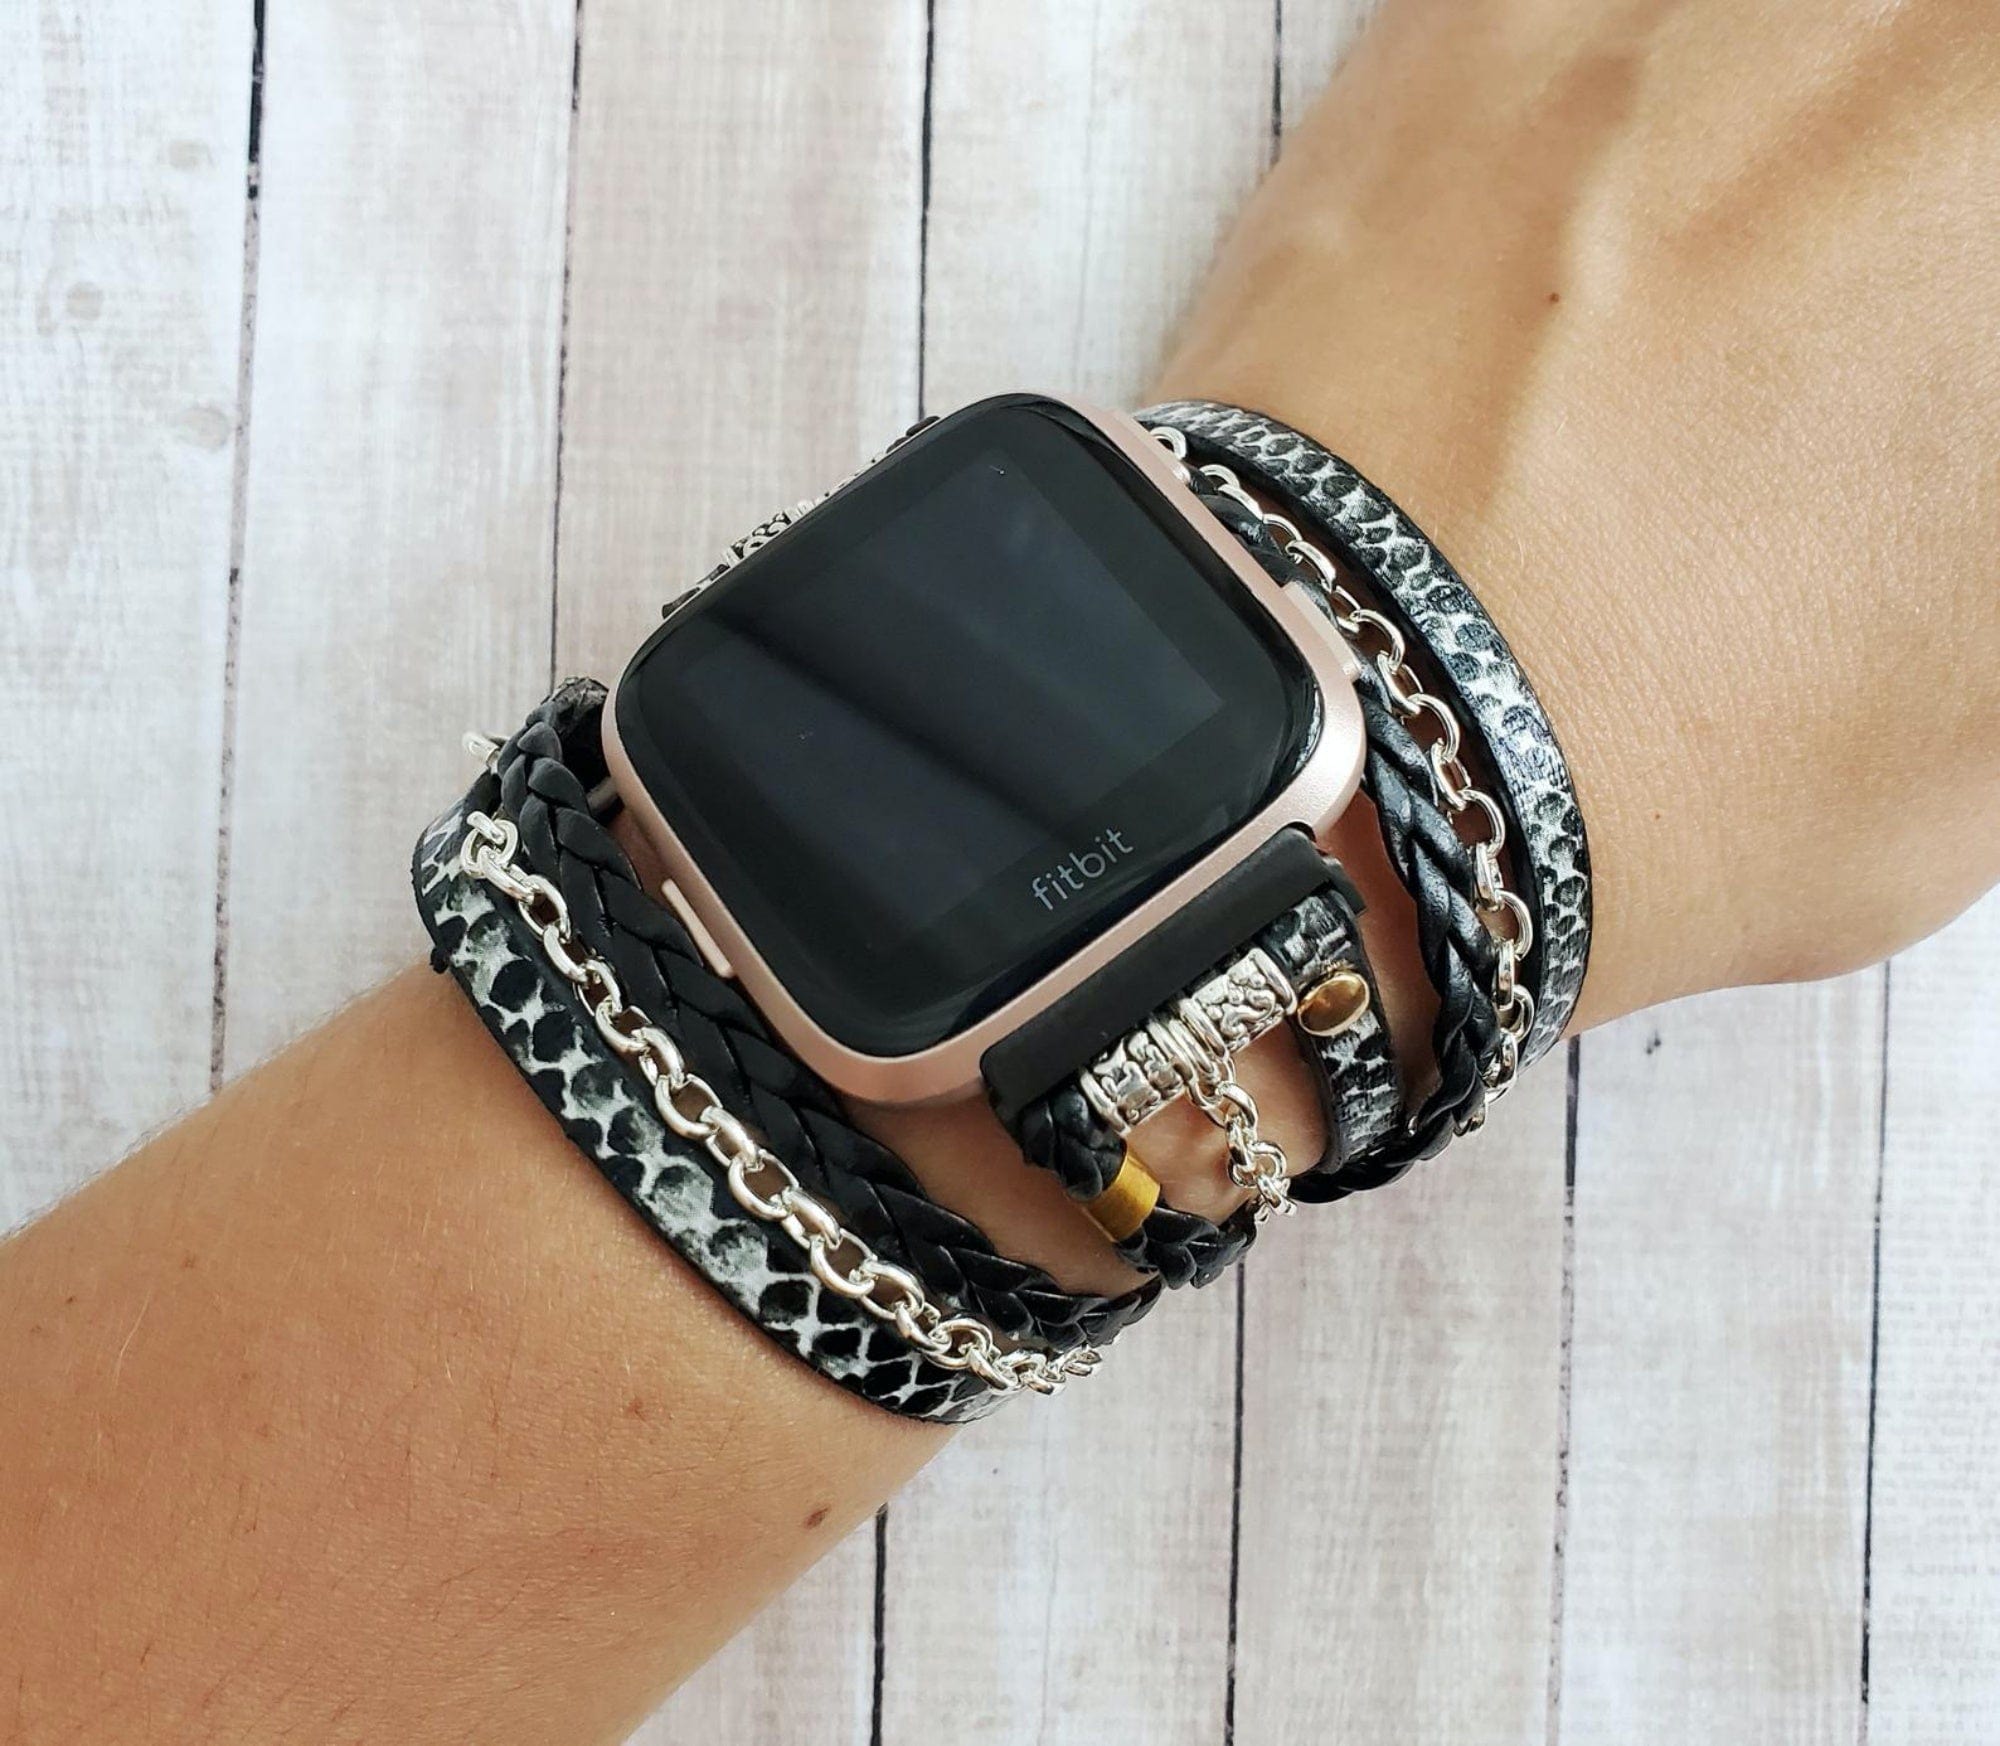 Boho Chic Vegan Leather Braided Watch Bracelet Band for Fitbit Luxe